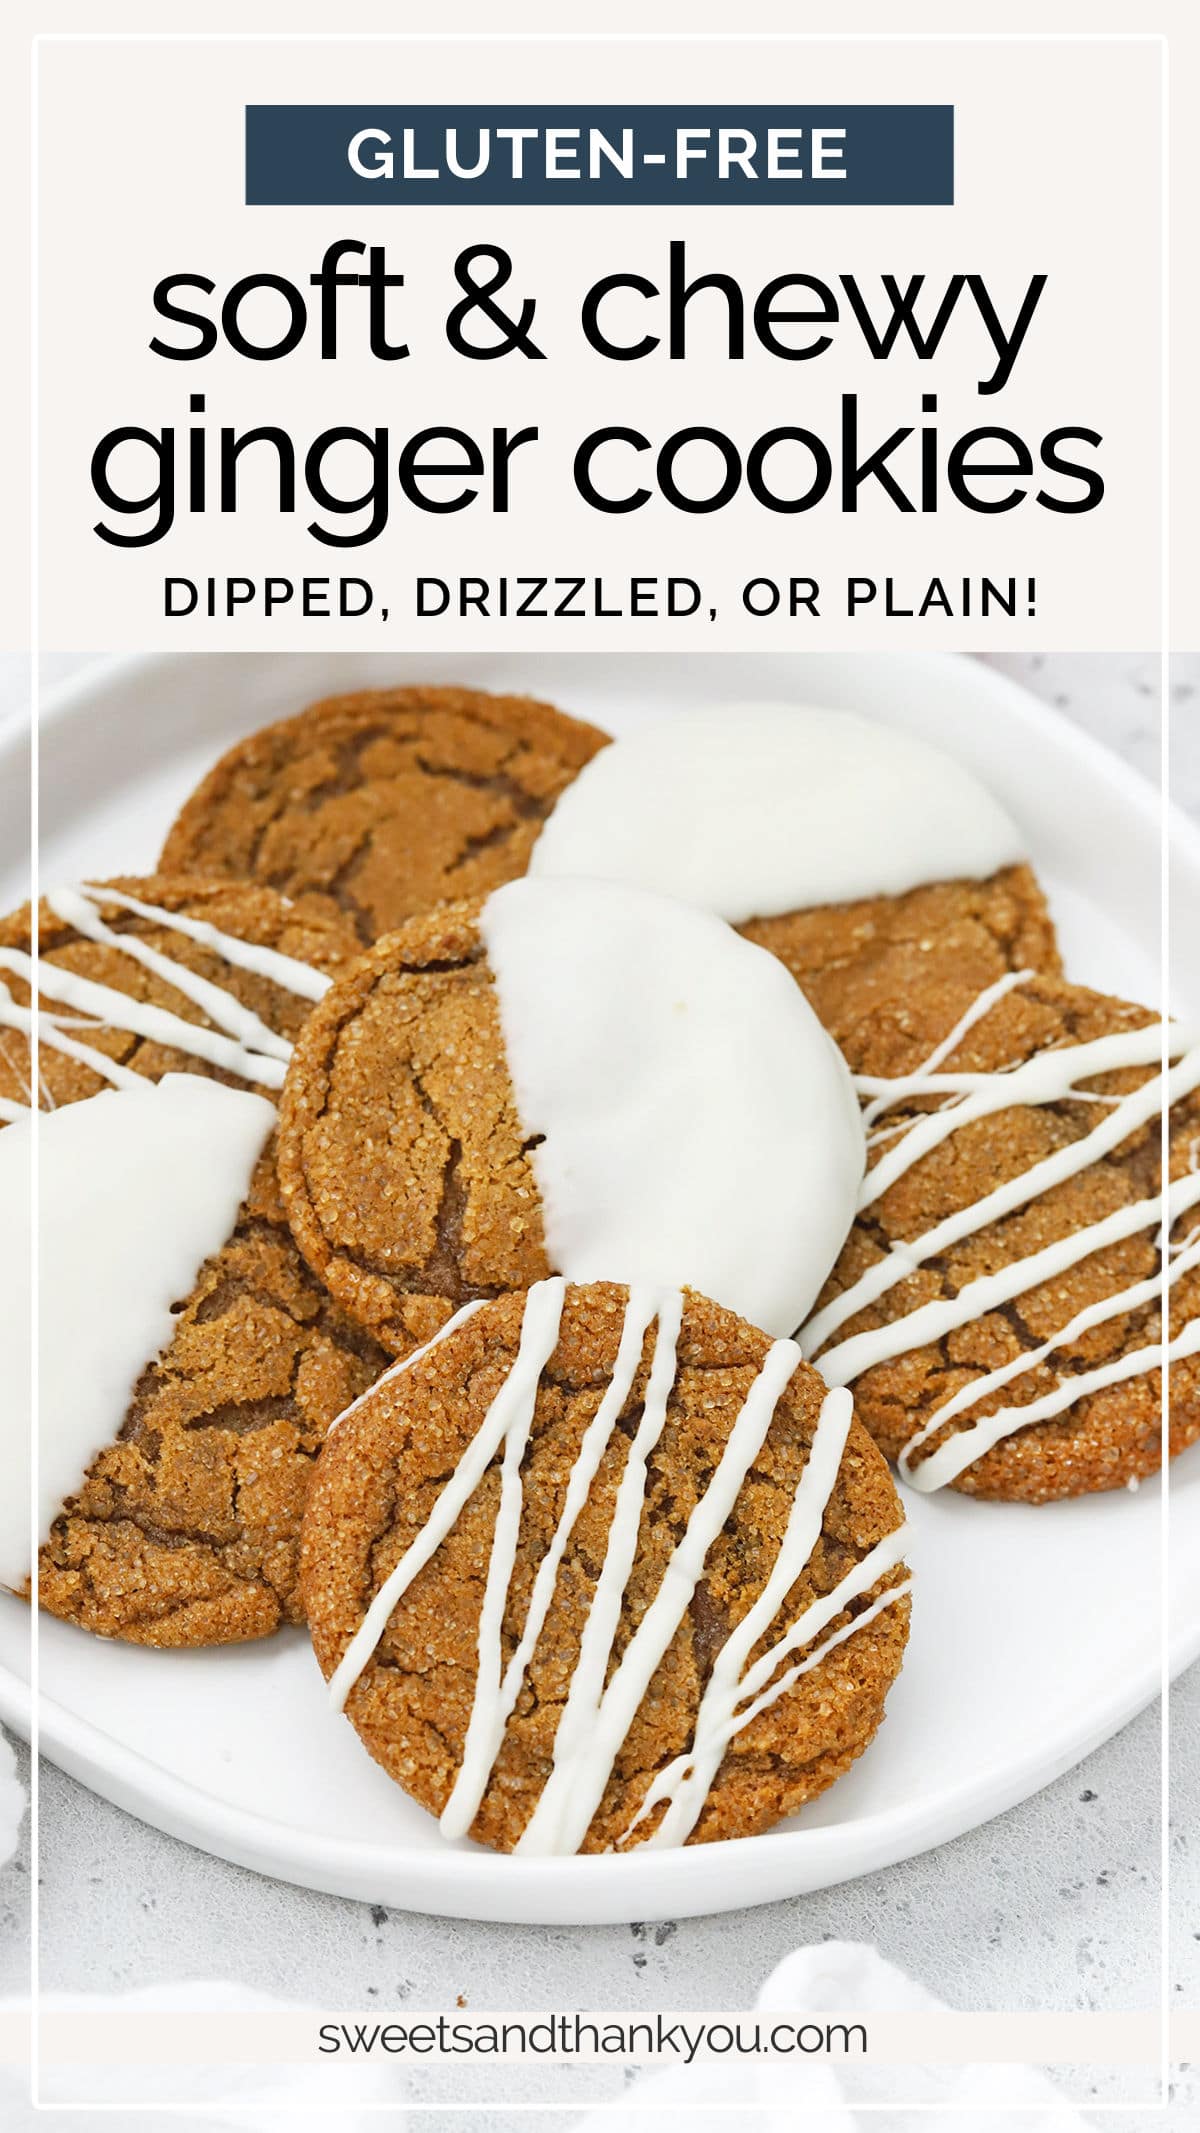 Soft & Chewy Gluten-Free Ginger Cookies - These gorgeous soft ginger cookies taste even better than they look. Try them drizzled or dipped in white chocolate for an extra pretty finish! // gluten free ginger cookies // chewy ginger cookies // soft ginger cookies // holiday ginger cookies // dipped ginger cookies // easy ginger cookies // gluten free holiday cookies // holiday cookie plate